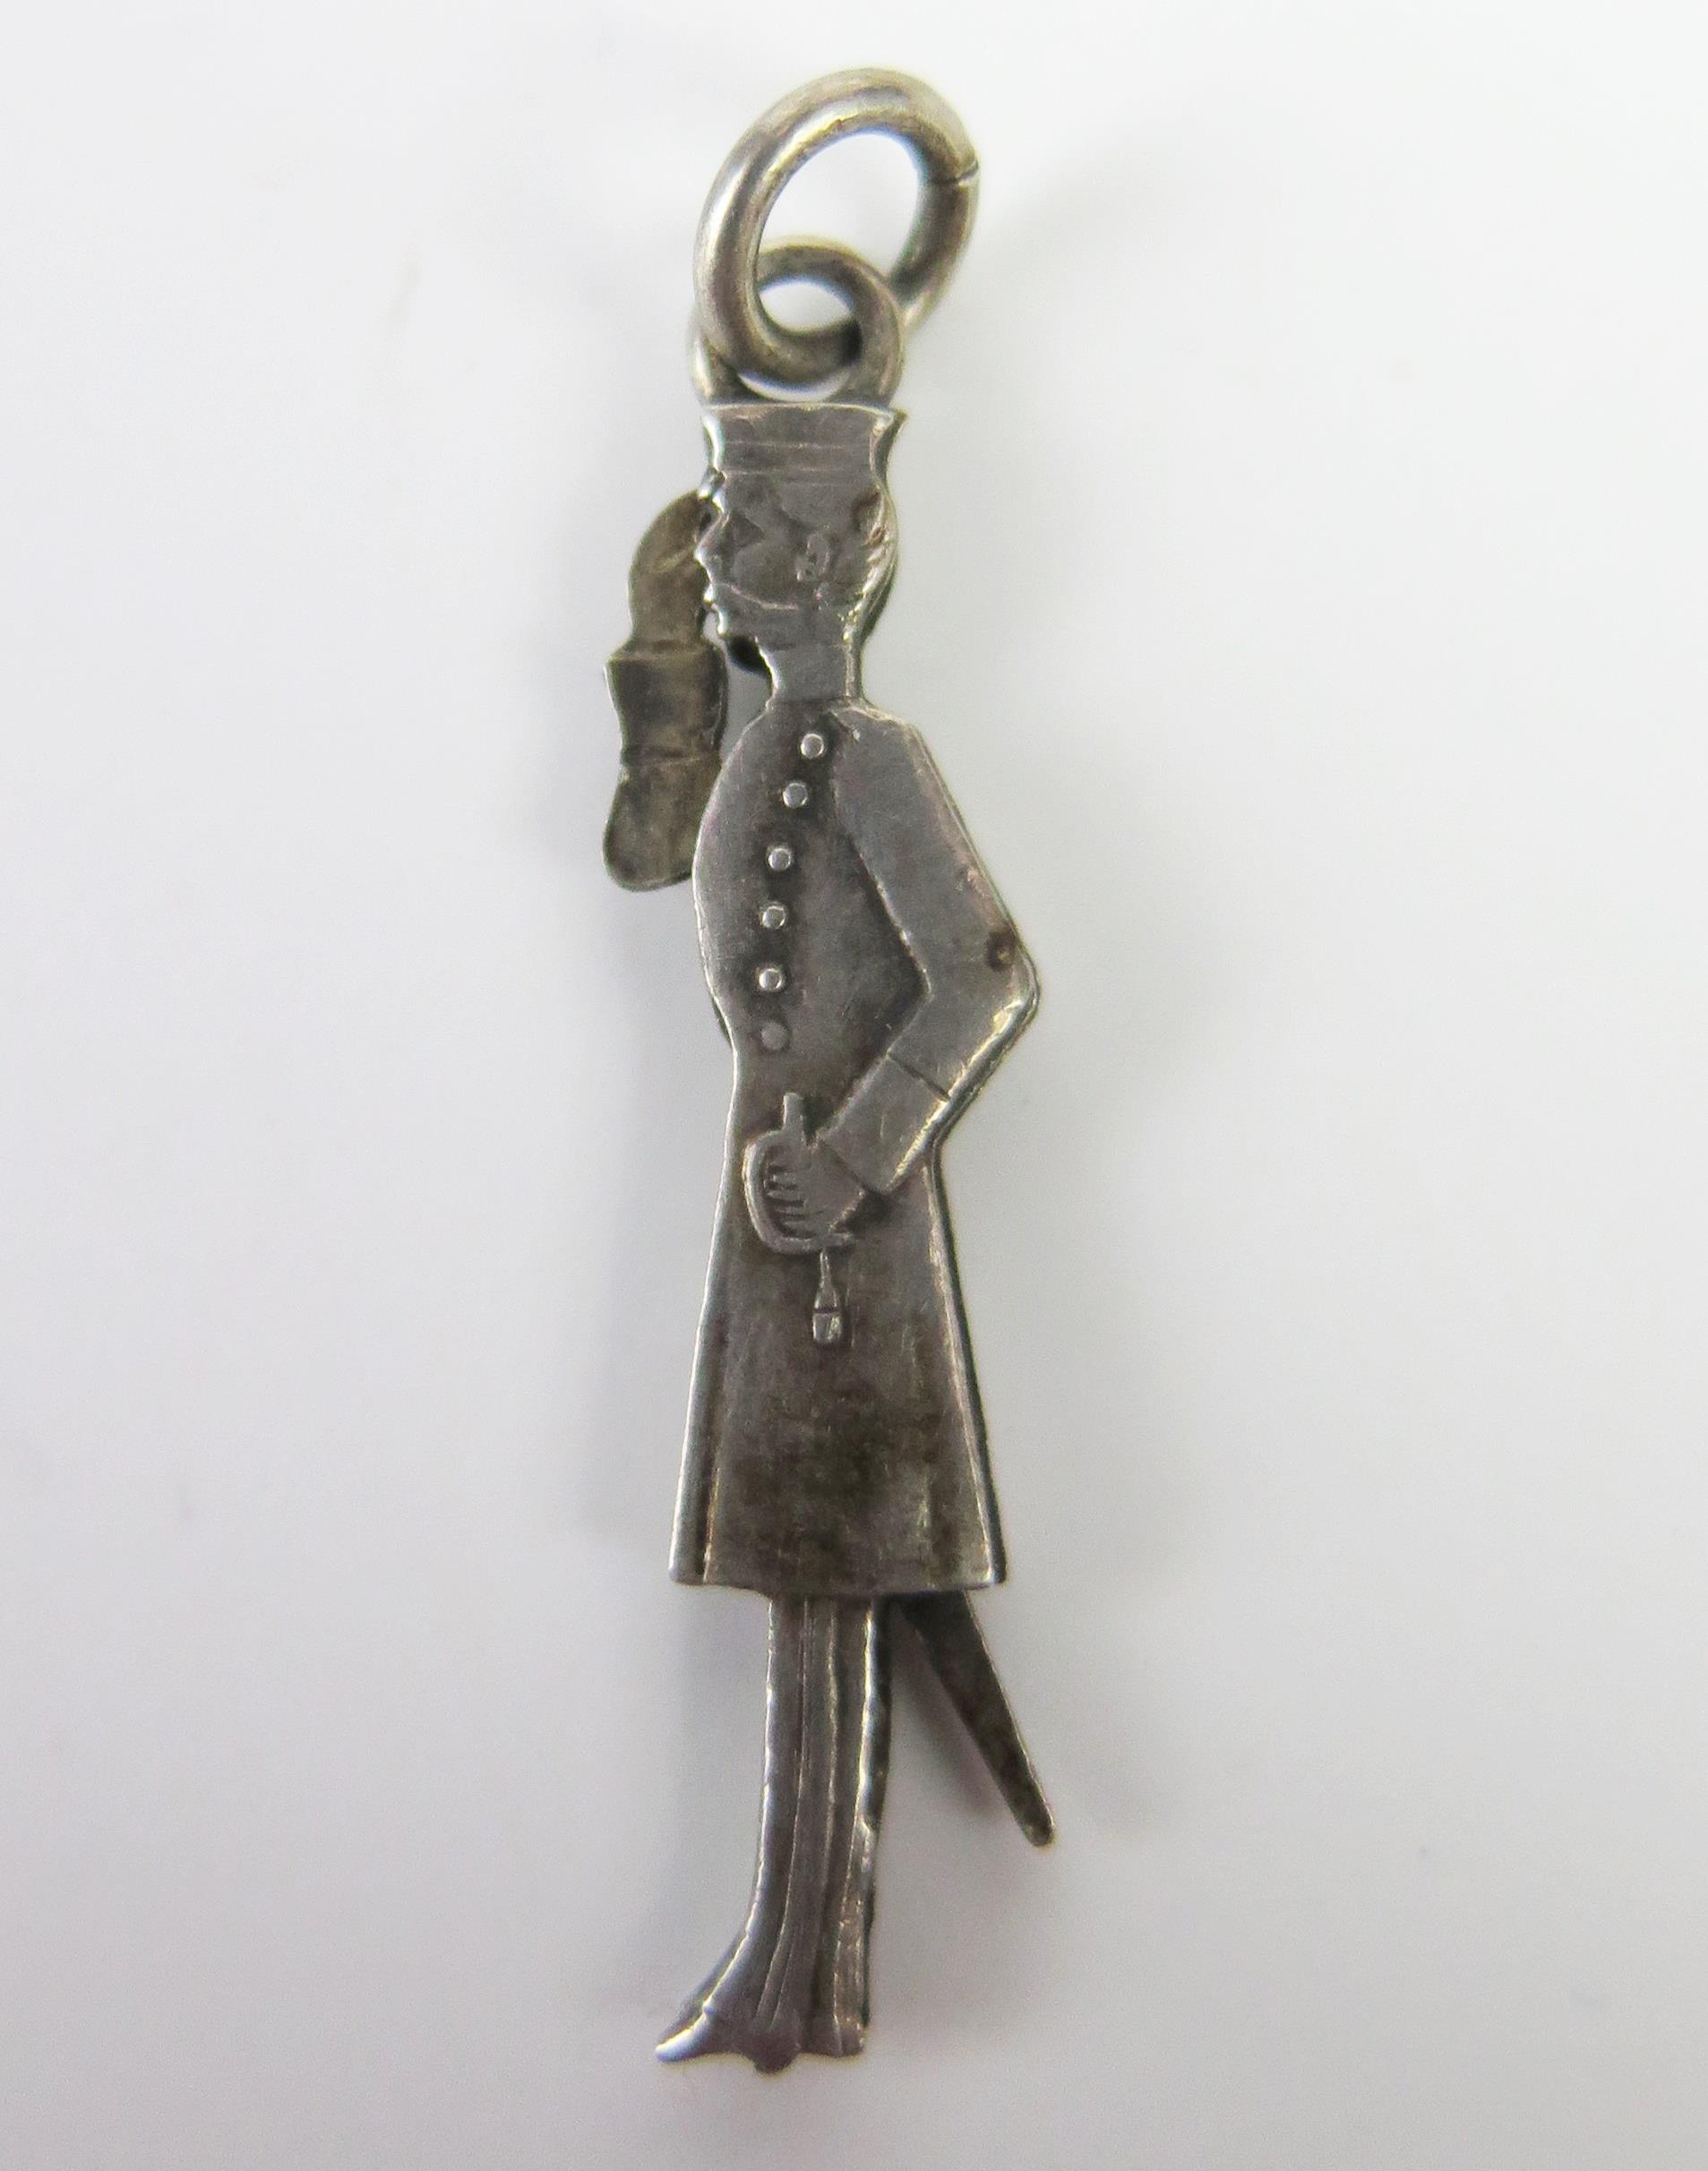 An Antique White Metal Articulated Saluting Officer Pendant, arm moves by adjusting the sword, c.